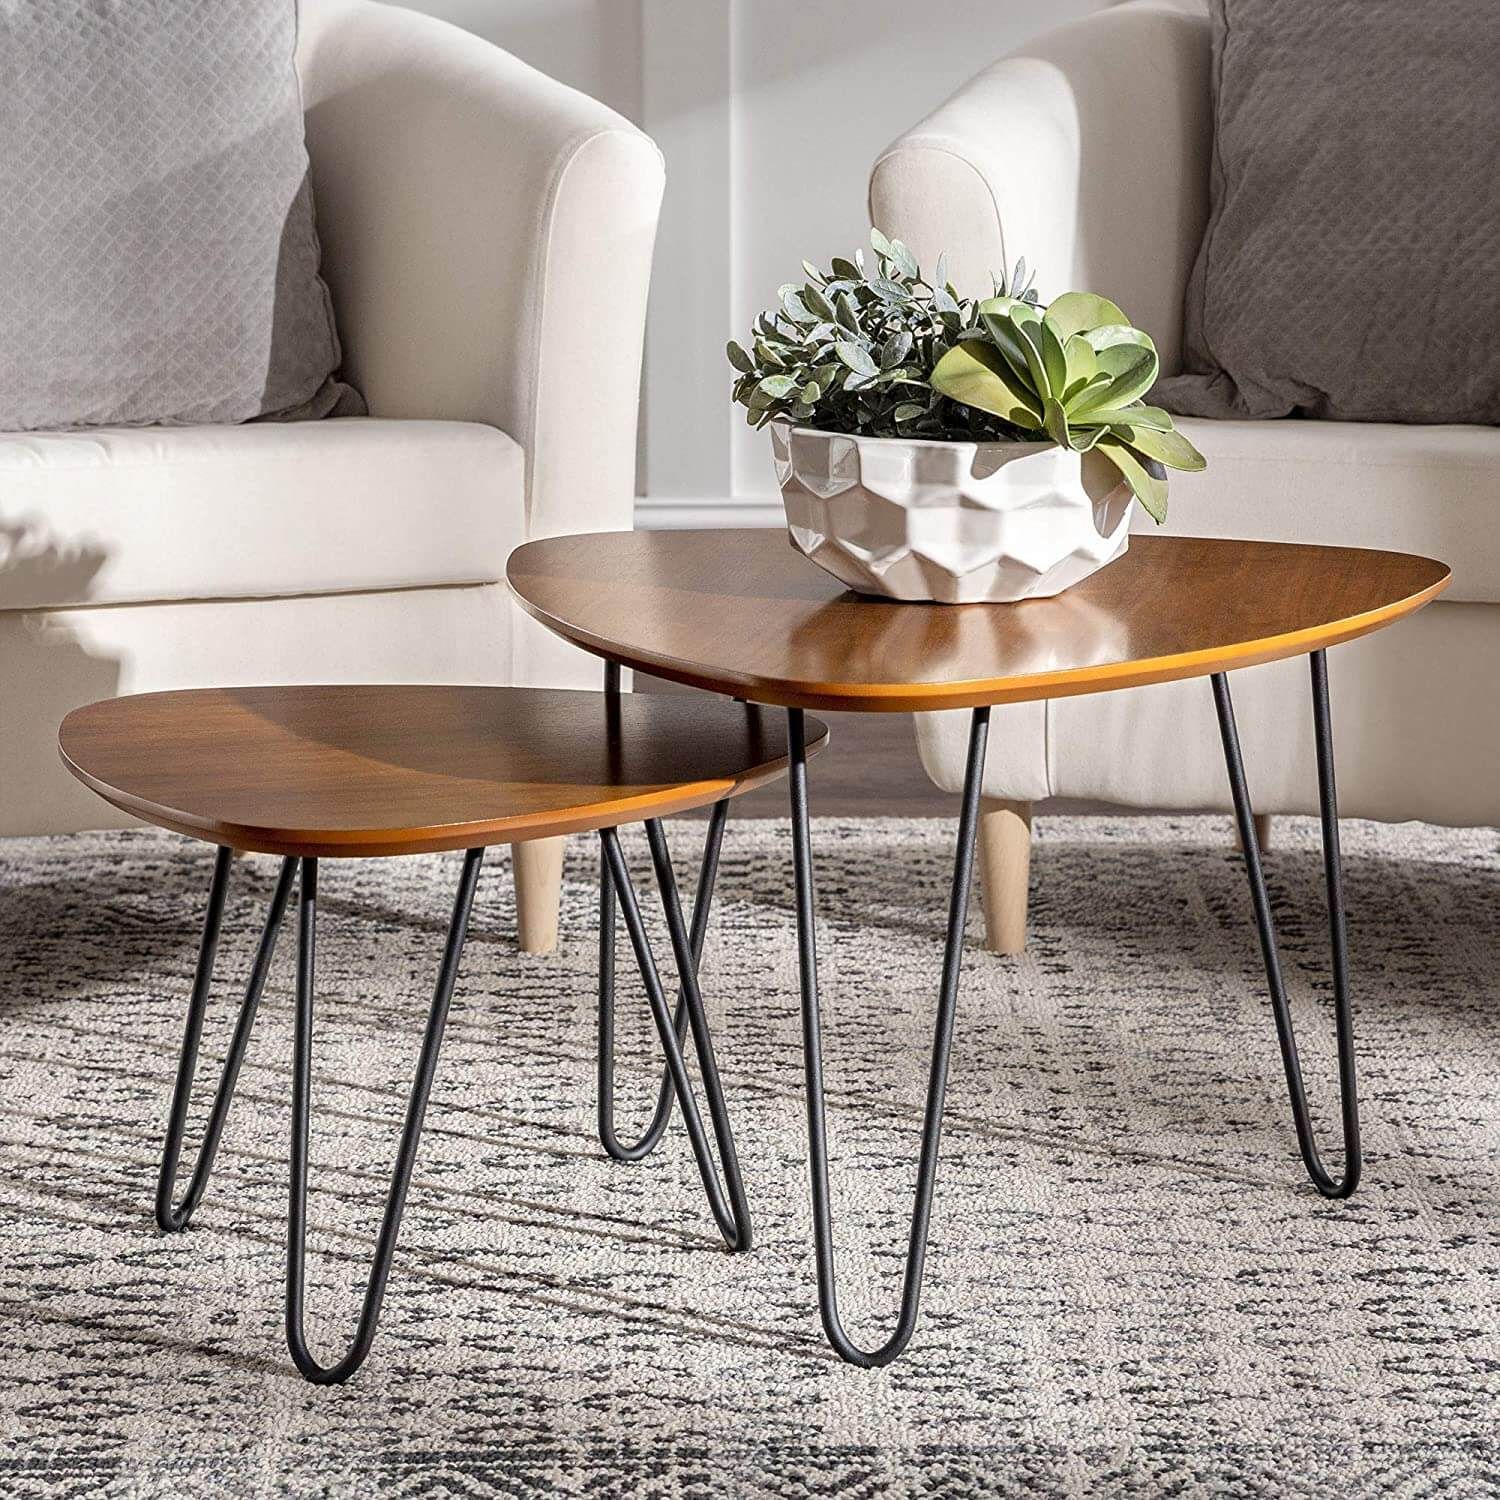 Choosing The Perfect Mid Century Modern Coffee Table – Oceanone Interiors For Mid Century Modern Coffee Tables (Gallery 11 of 20)